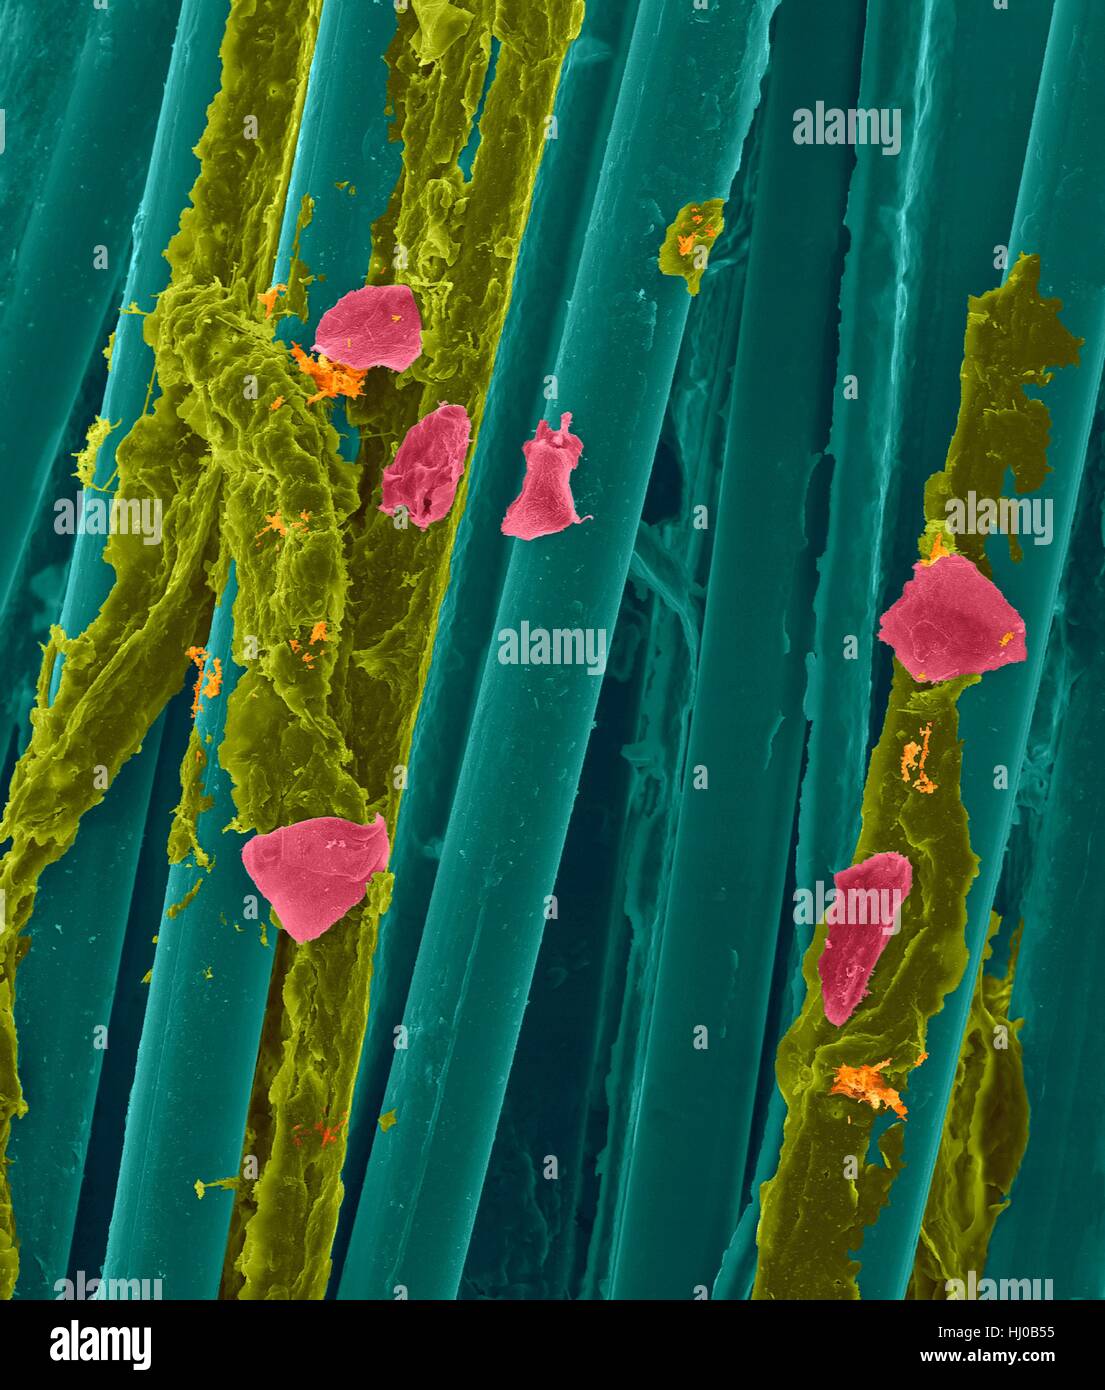 Used wax dental floss with dental plaque (yellow),bacteria (orange) cheek cells (pink) on dental floss fibres (blue),coloured scanning electron micrograph (SEM).Plaque consists of biofilm of bacteria embedded in glycoprotein matrix.The matrix is formed from bacterial secretions saliva.The Stock Photo